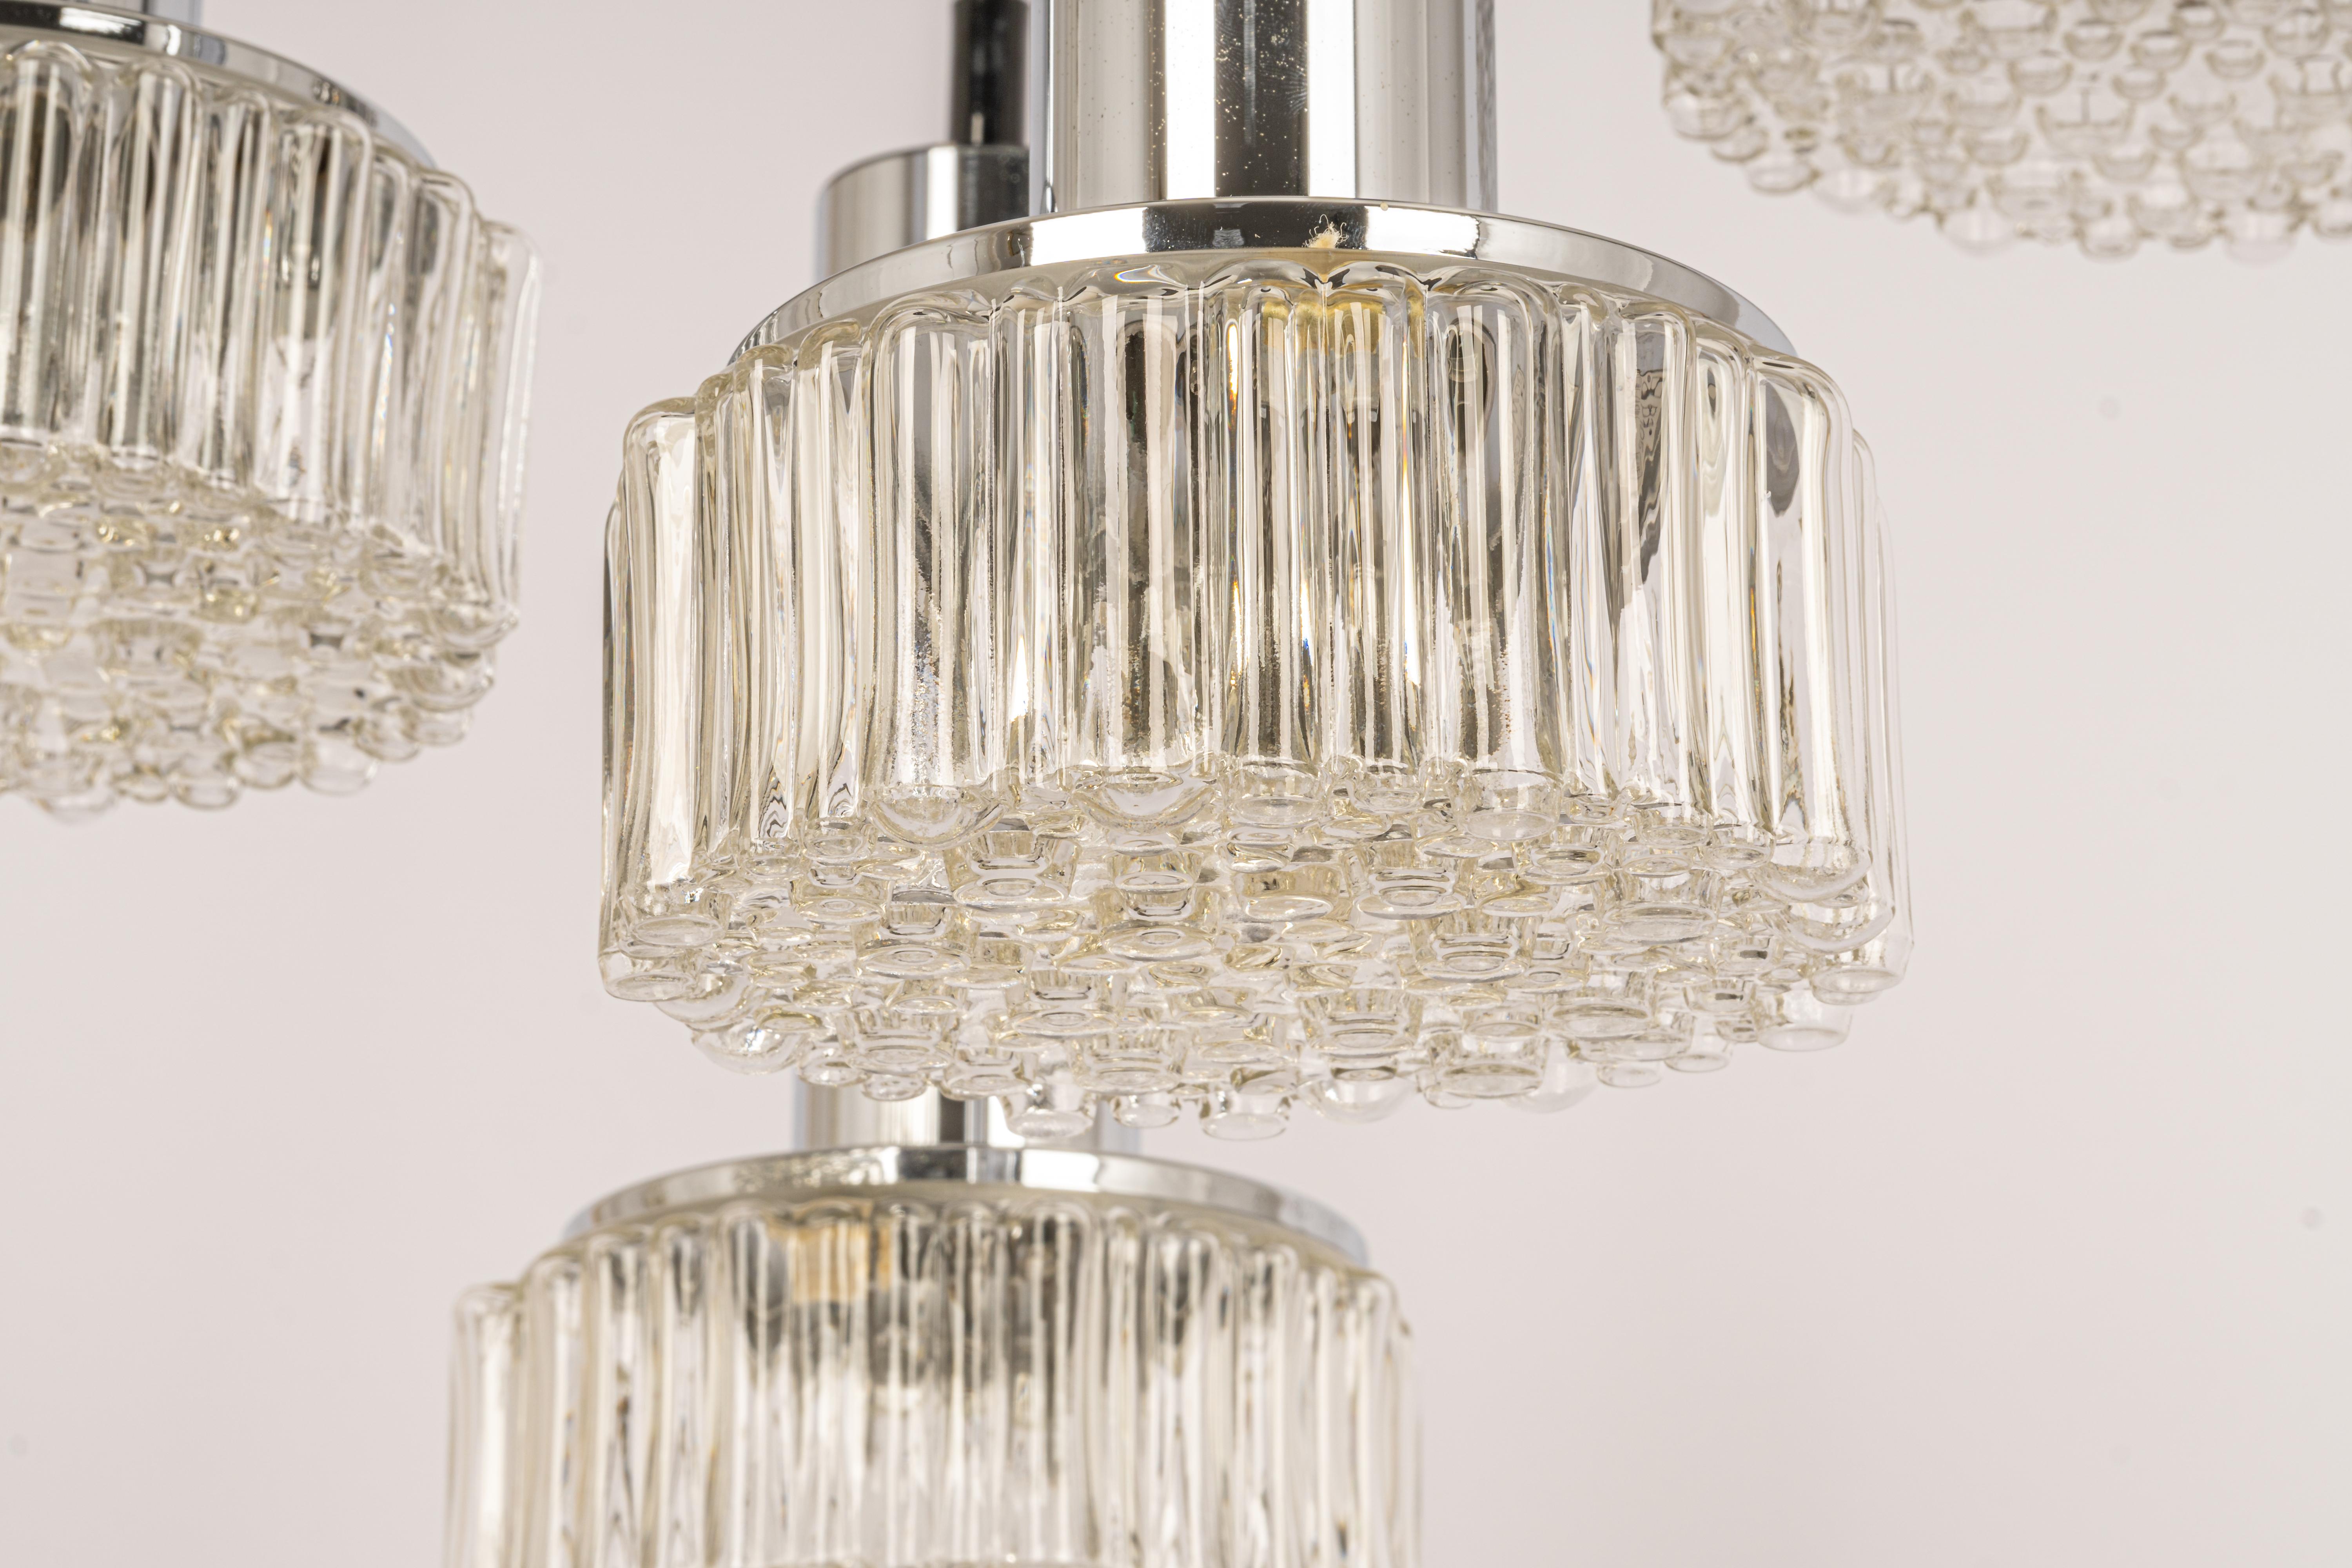 A special large cascading chandelier designed by Rolf Krüger for Staff Leuchten, manufactured in Germany, circa 1970s with 4 round bubble Clear glasses.
Wonderful form and stunning light effect.
Sockets: 4 x E26 /E27 standard bulb. (100 W